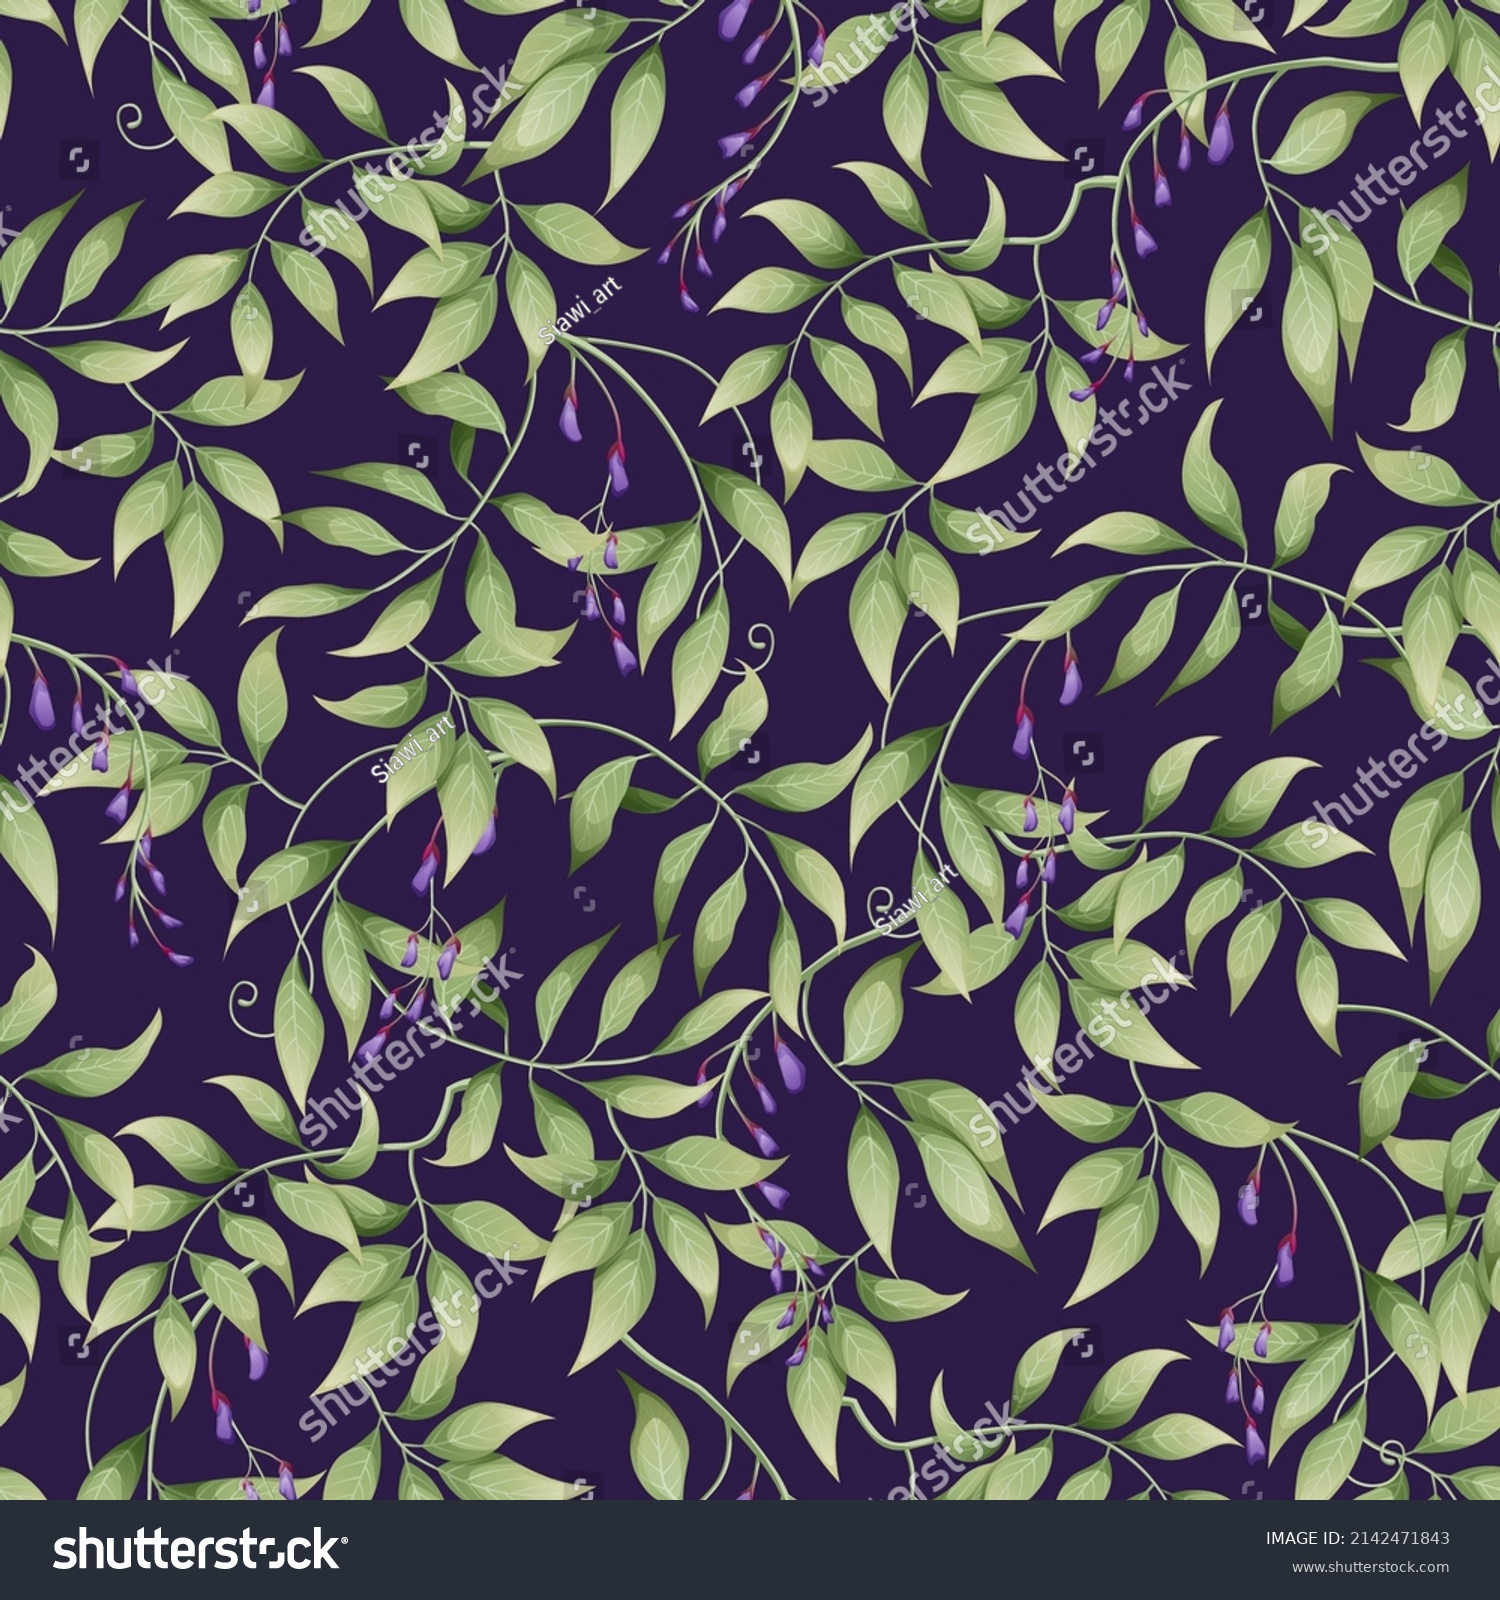 SVG of Seamless pattern with purple wisteria and green leaves on a dark background. Great for textile, fabric, wrapping paper, wallpaper. svg